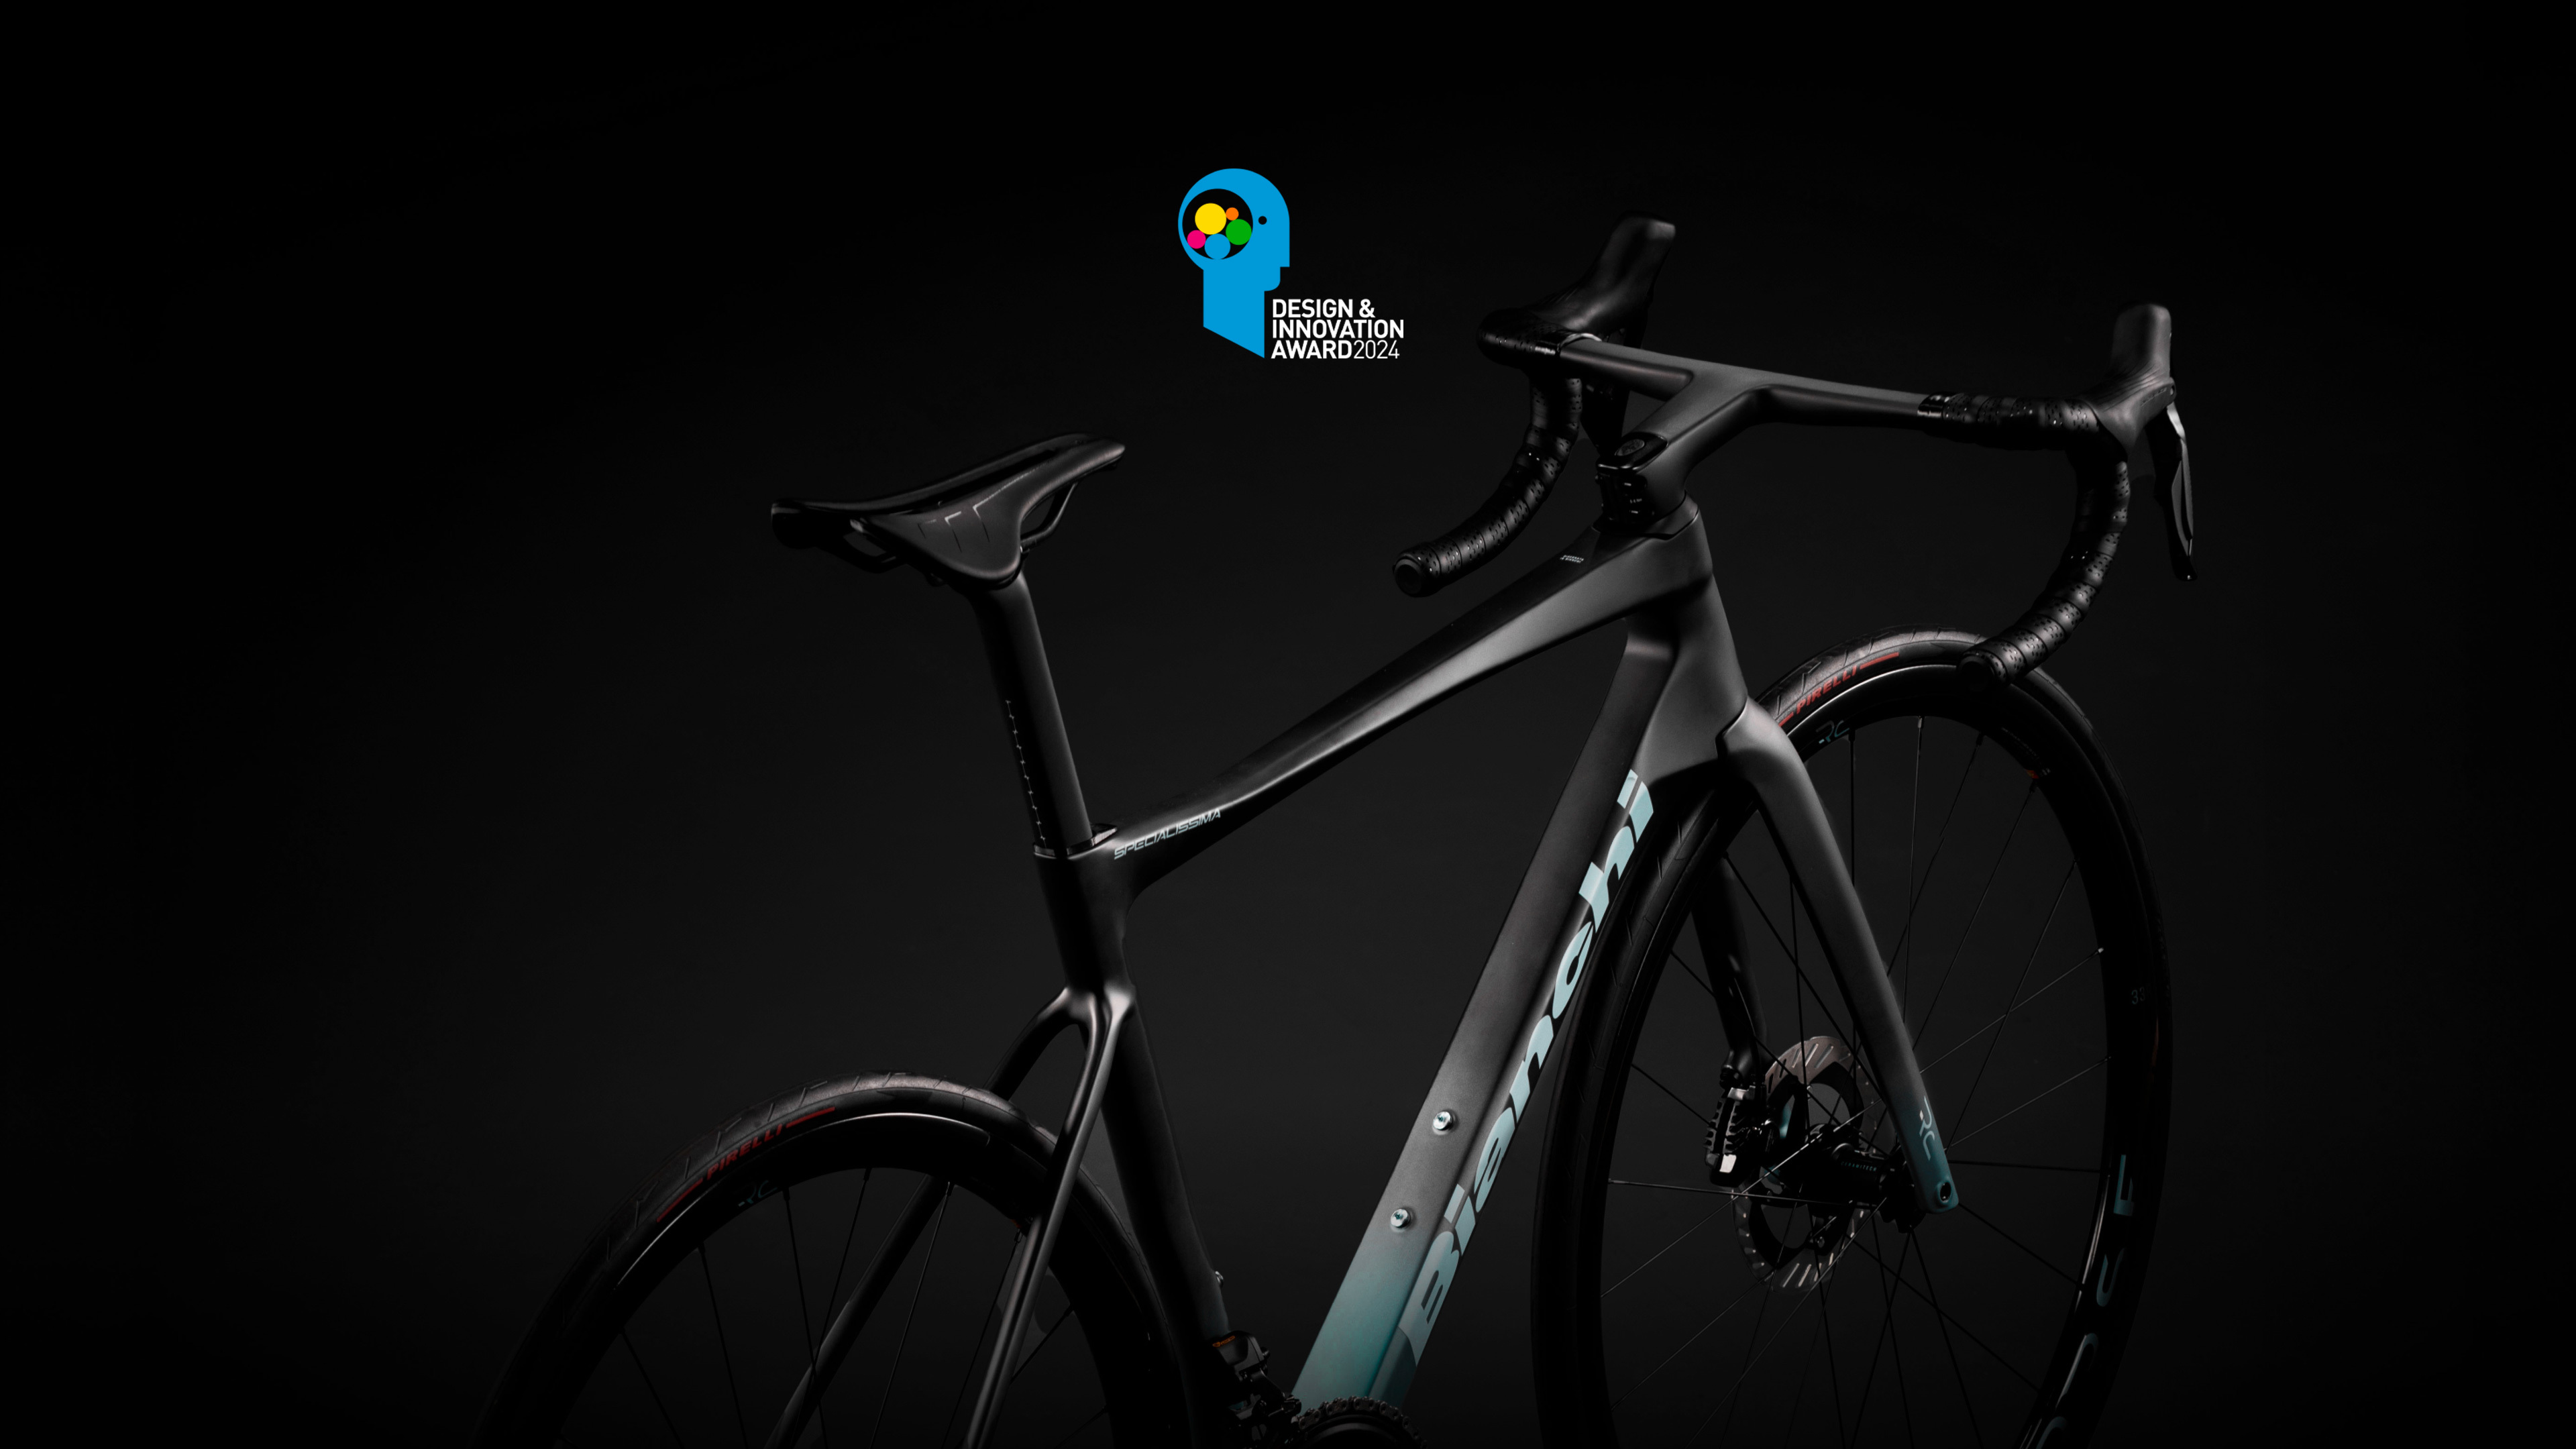 BIANCHI SPECIALISSIMA RC WINS THE DESIGN & INNOVATION AWARD